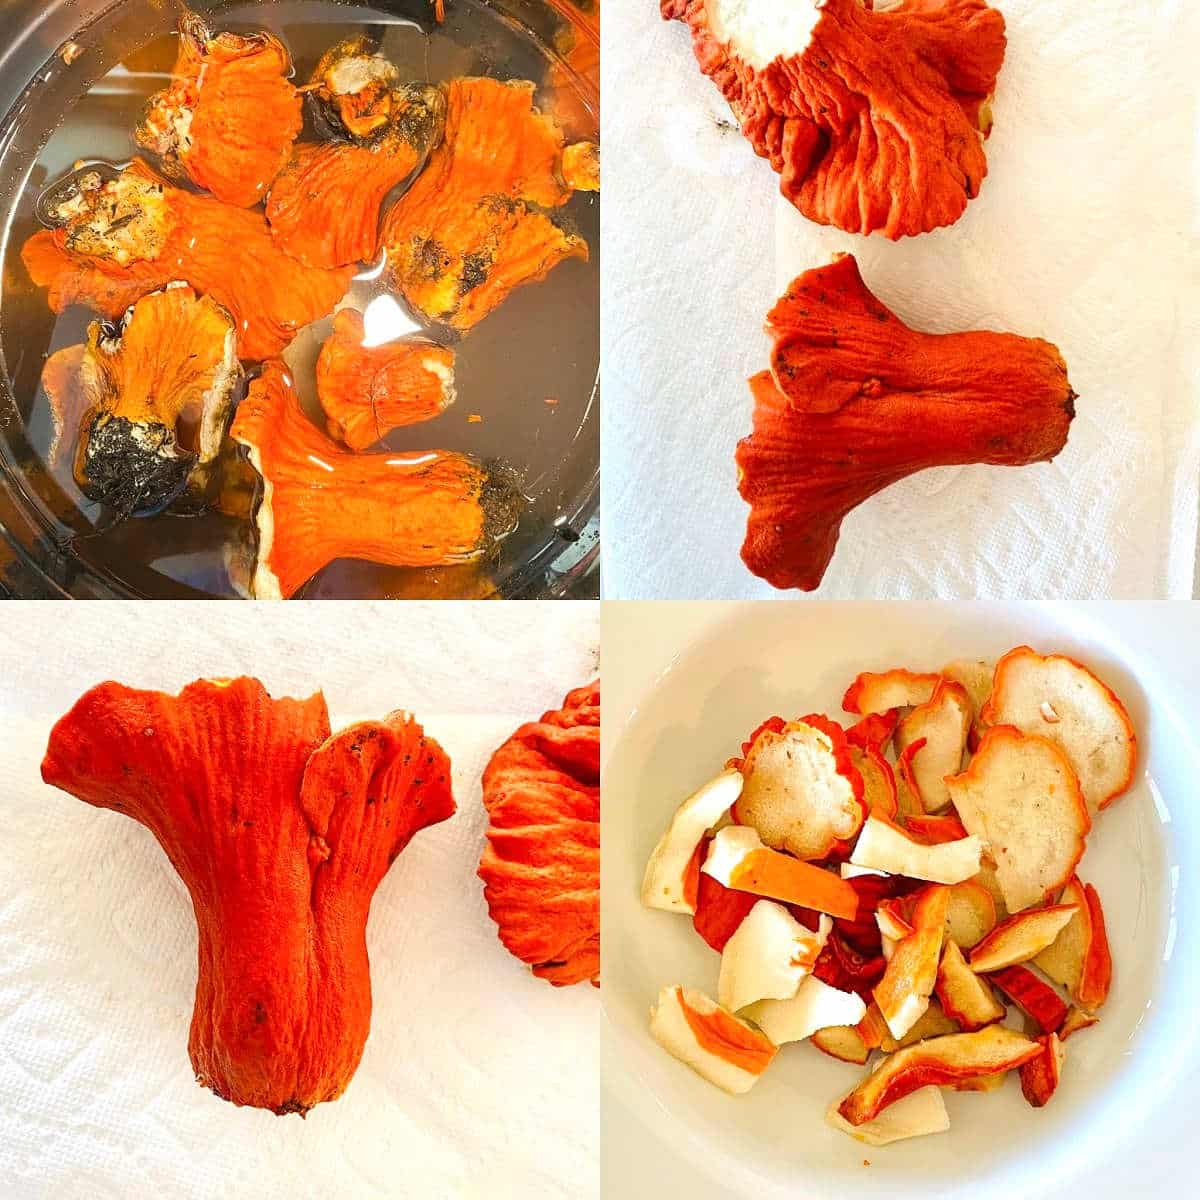 process shots on how to clean lobster mushrooms